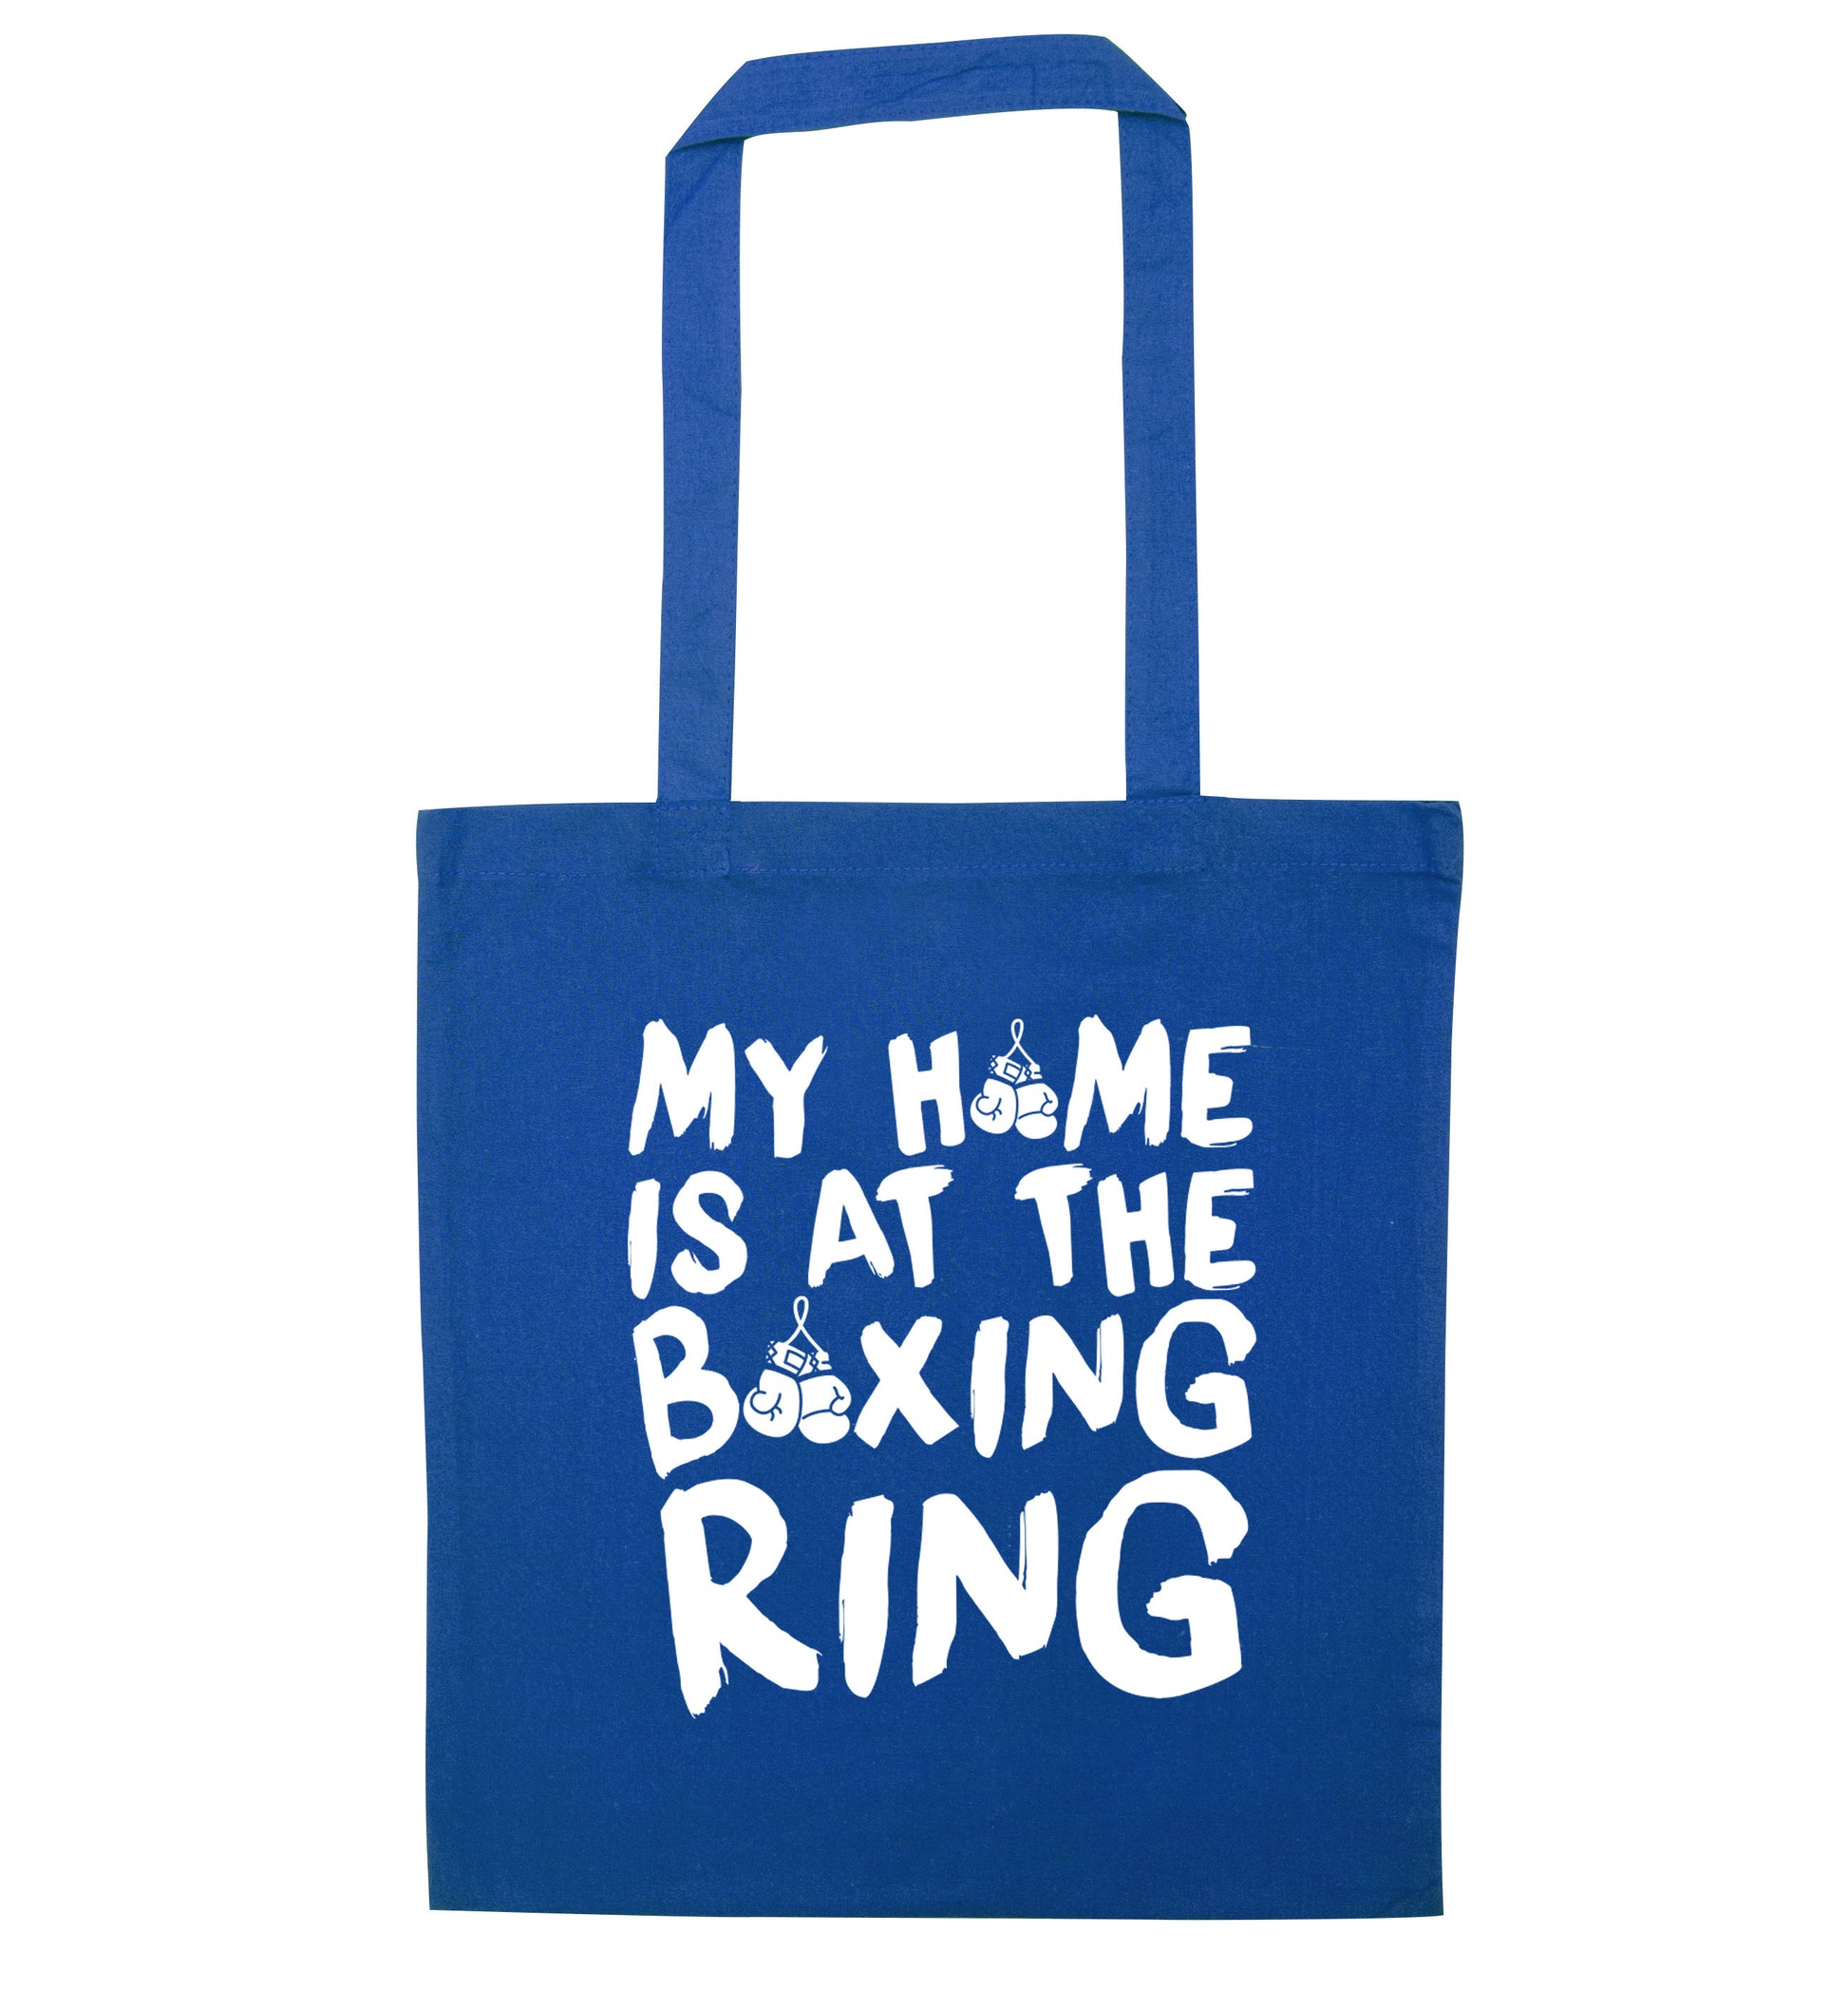 My home is at the boxing ring blue tote bag